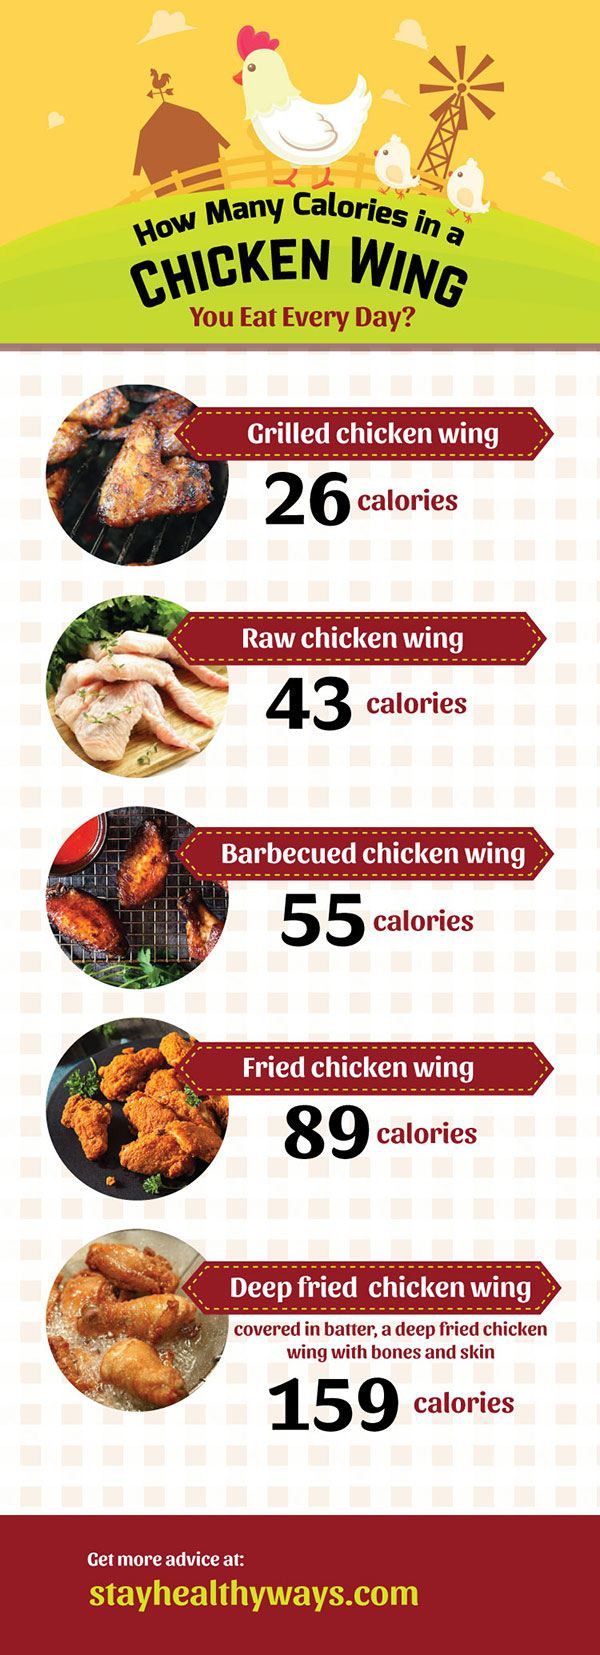 Calories In Chicken Wings Awesome How Many Calories In A Chicken Wing You Eat Every Day